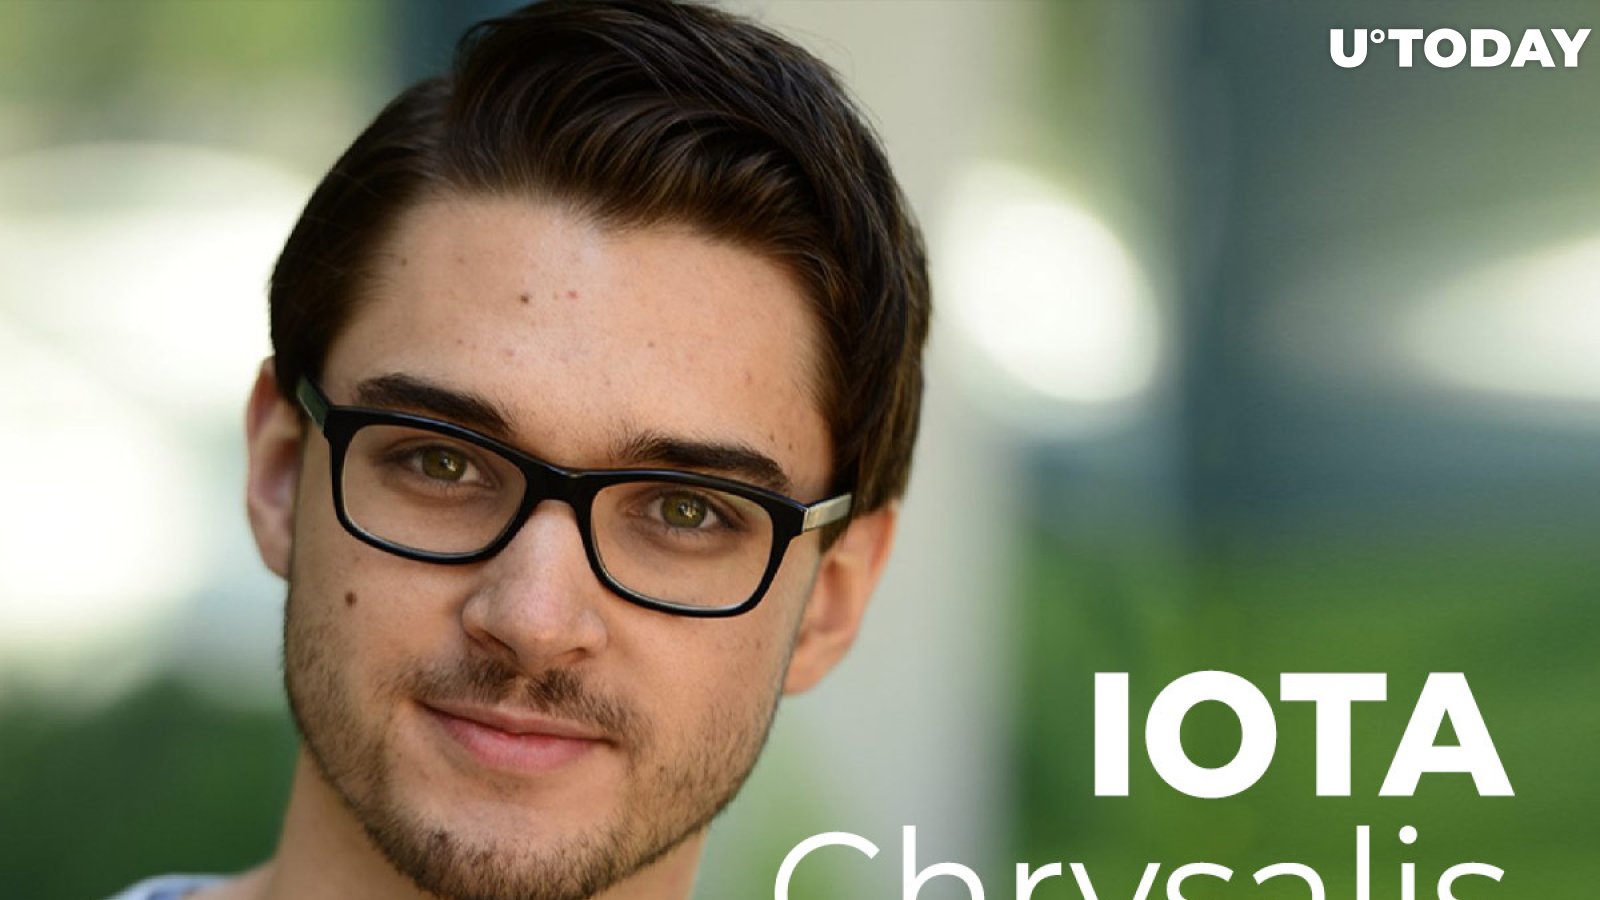 IOTA's Chrysalis Will Allow "Significantly More" Devices to Use It, Co-Founder Dominik Schiener Says